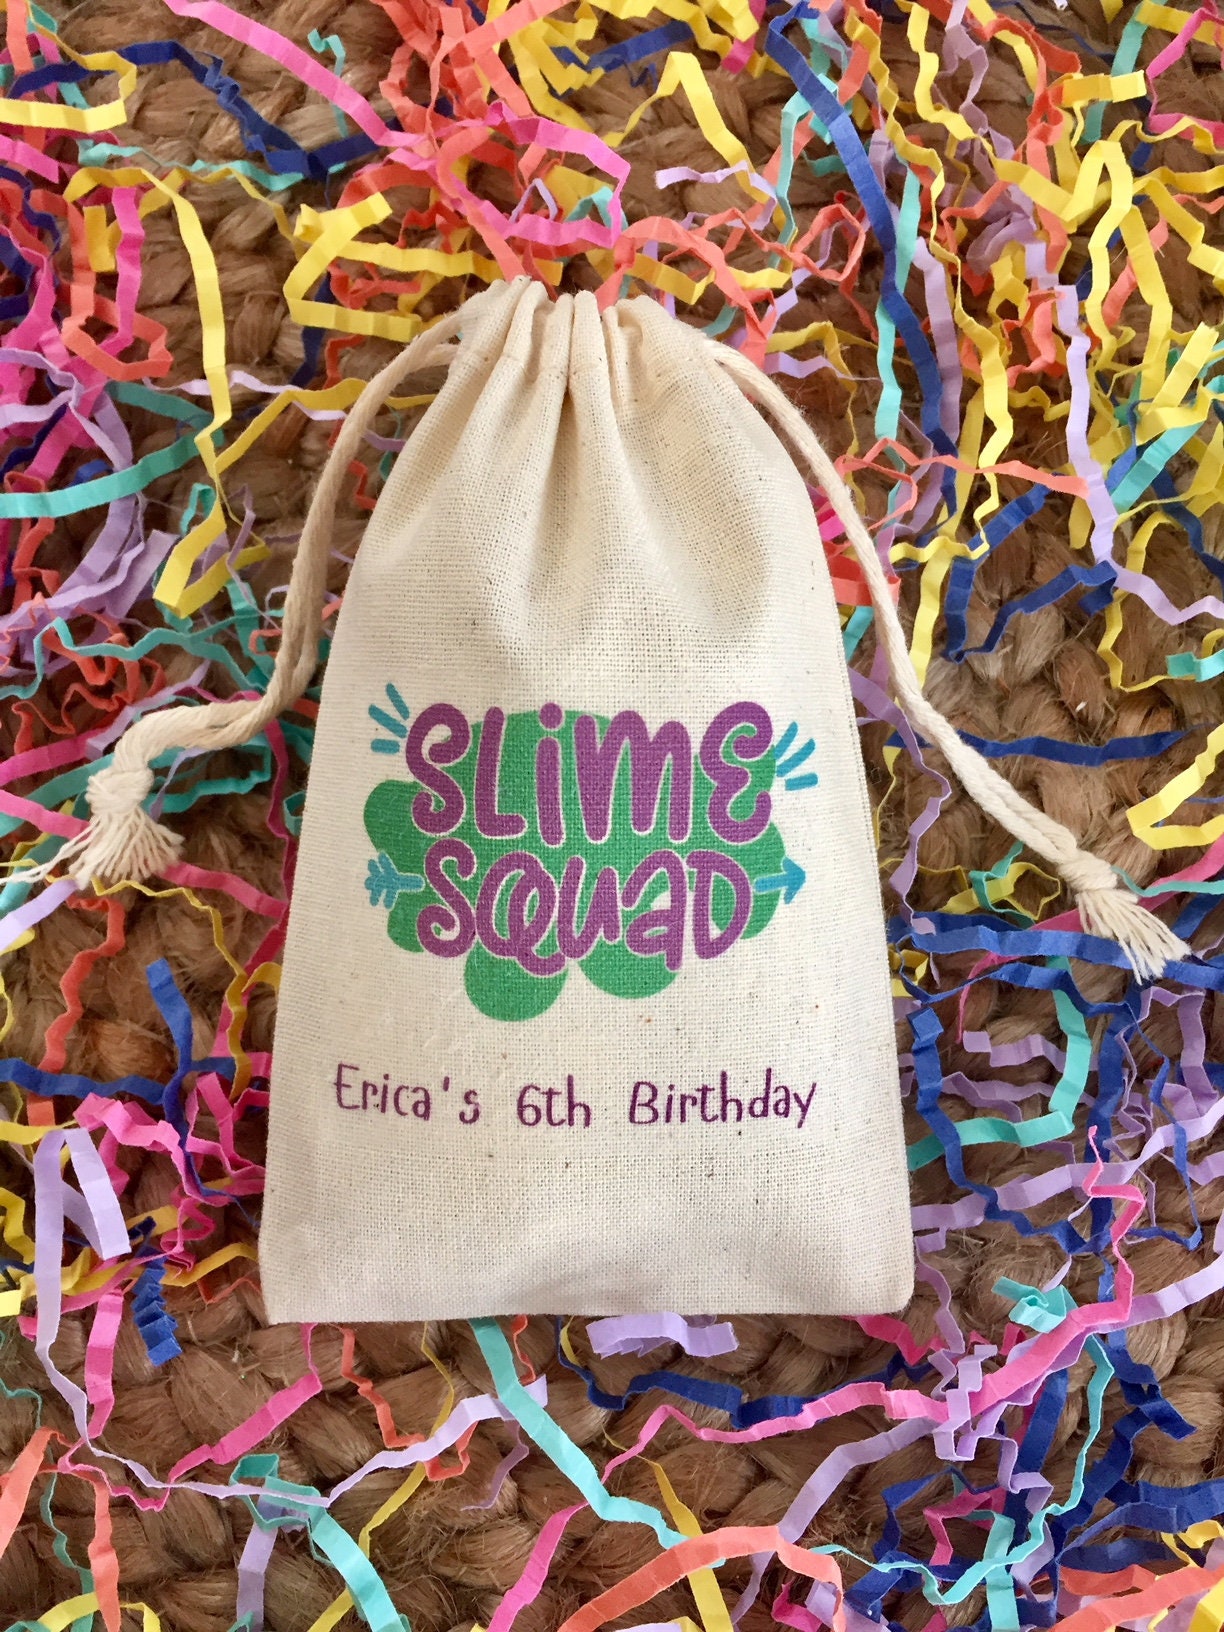  16 Pieces Slime Gift Bags for Slime Birthday Party Supplies, Slime Time Goodie Snacks Treat Candy Party Favors Bags with Handles for  Kids Adults Slime Theme Party Decorations : Toys & Games